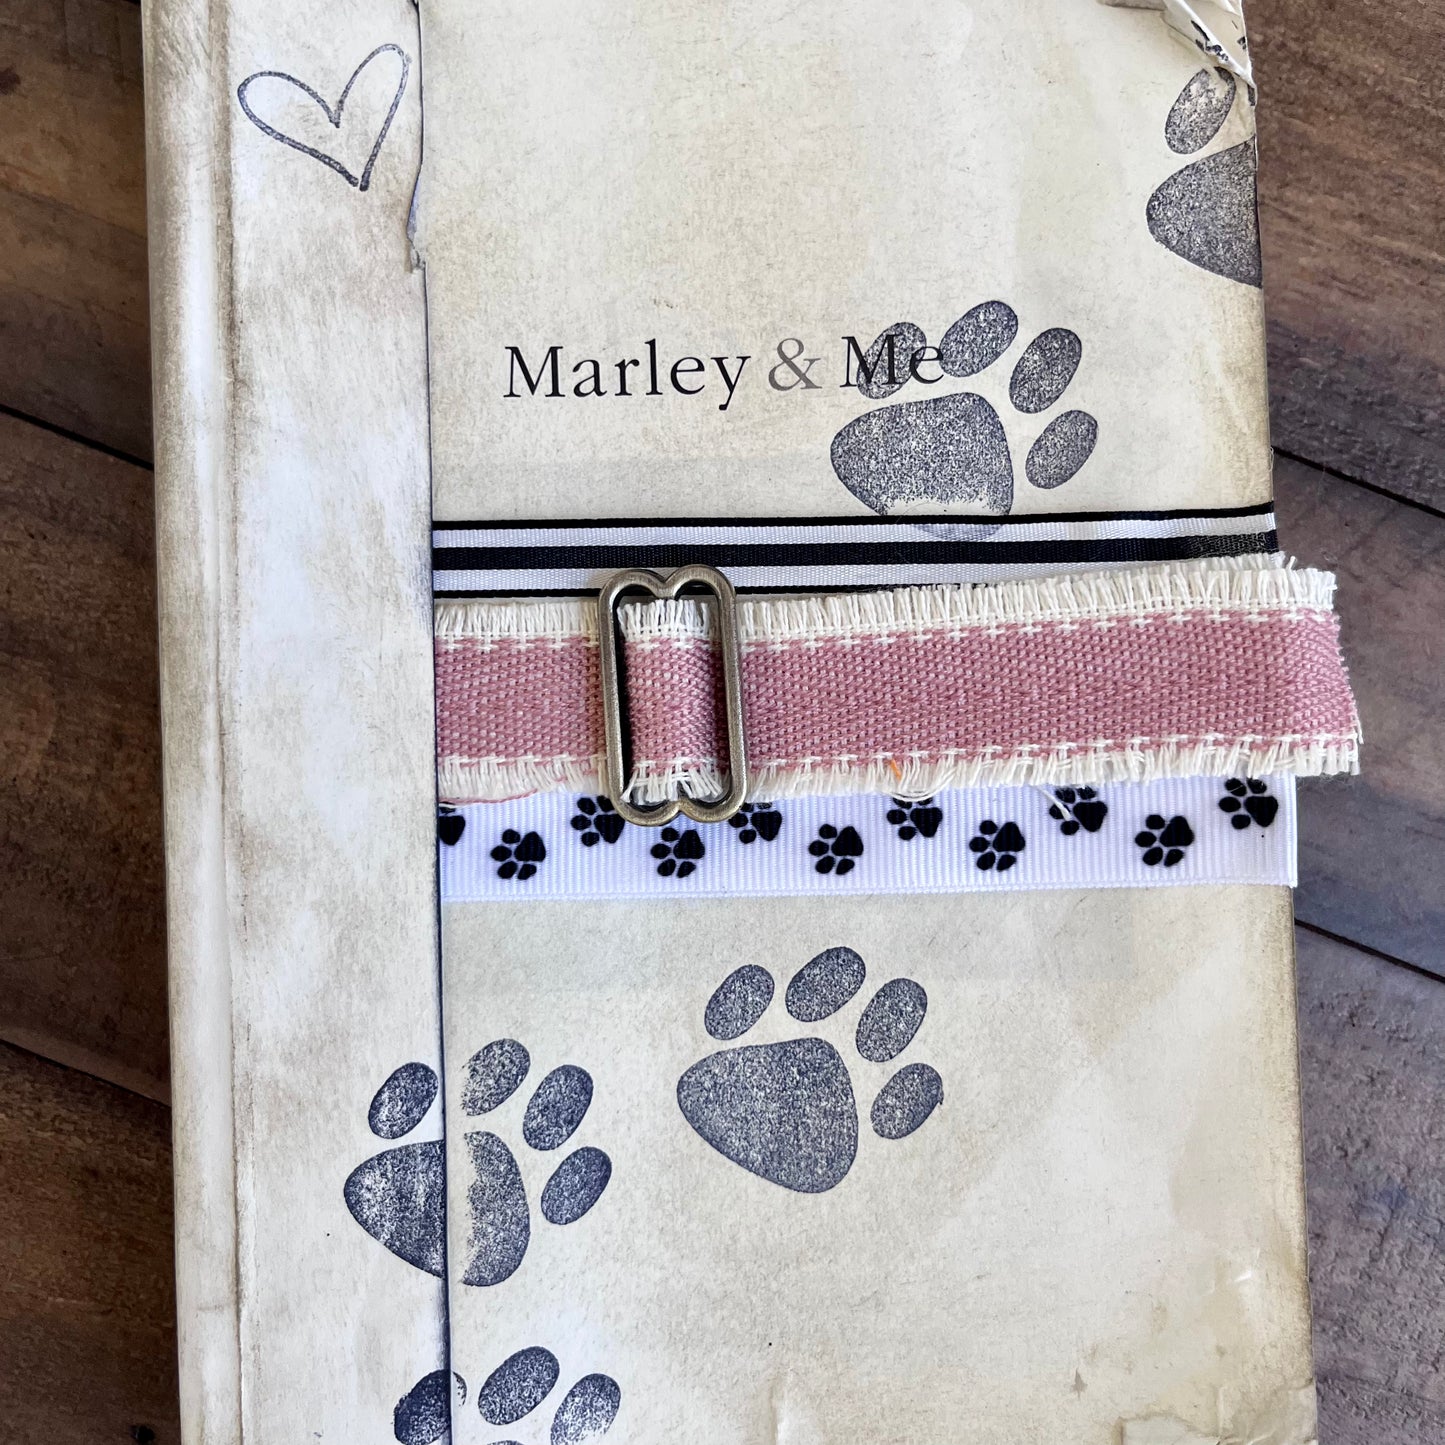 Marley & Me Book - The Blingy Blonde